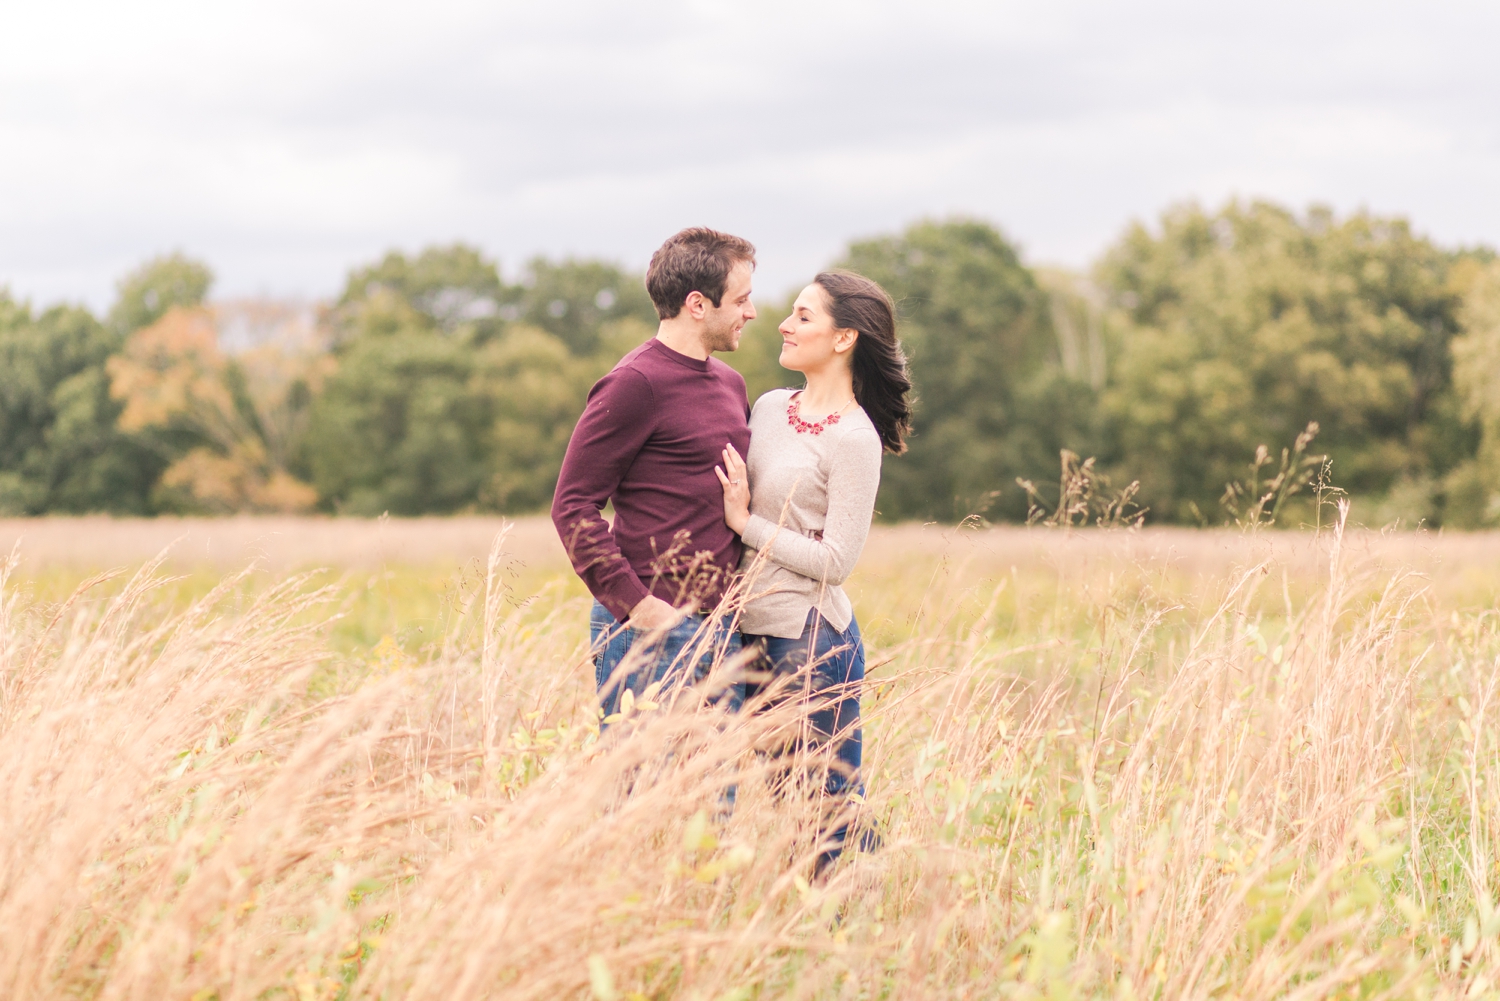 waveny-park-engagement-session-new-canaan-connecticut-westchester-nyc-hawaii-wedding-photographer-shaina-lee-photography-photo